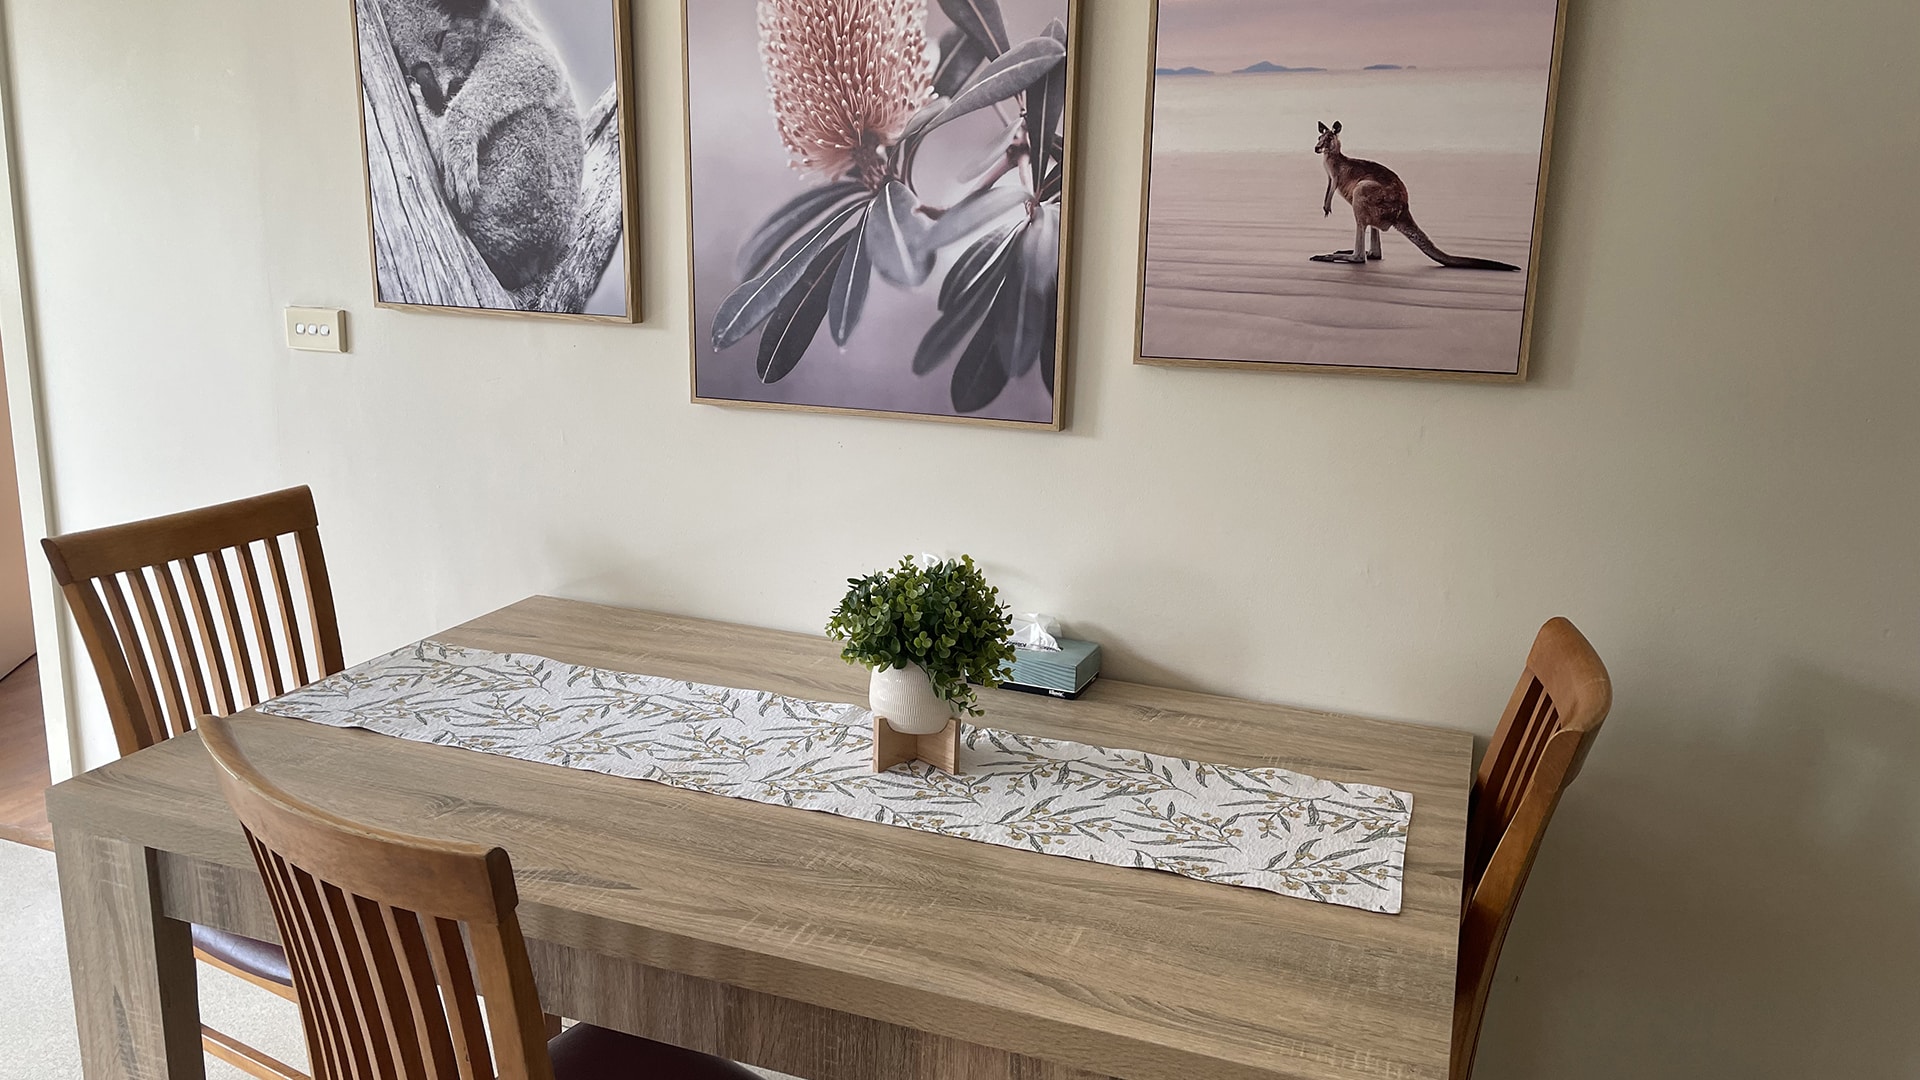 Supported-independent-living_Normanhurst-3-16089_image-9_upstairs-dining.jpg